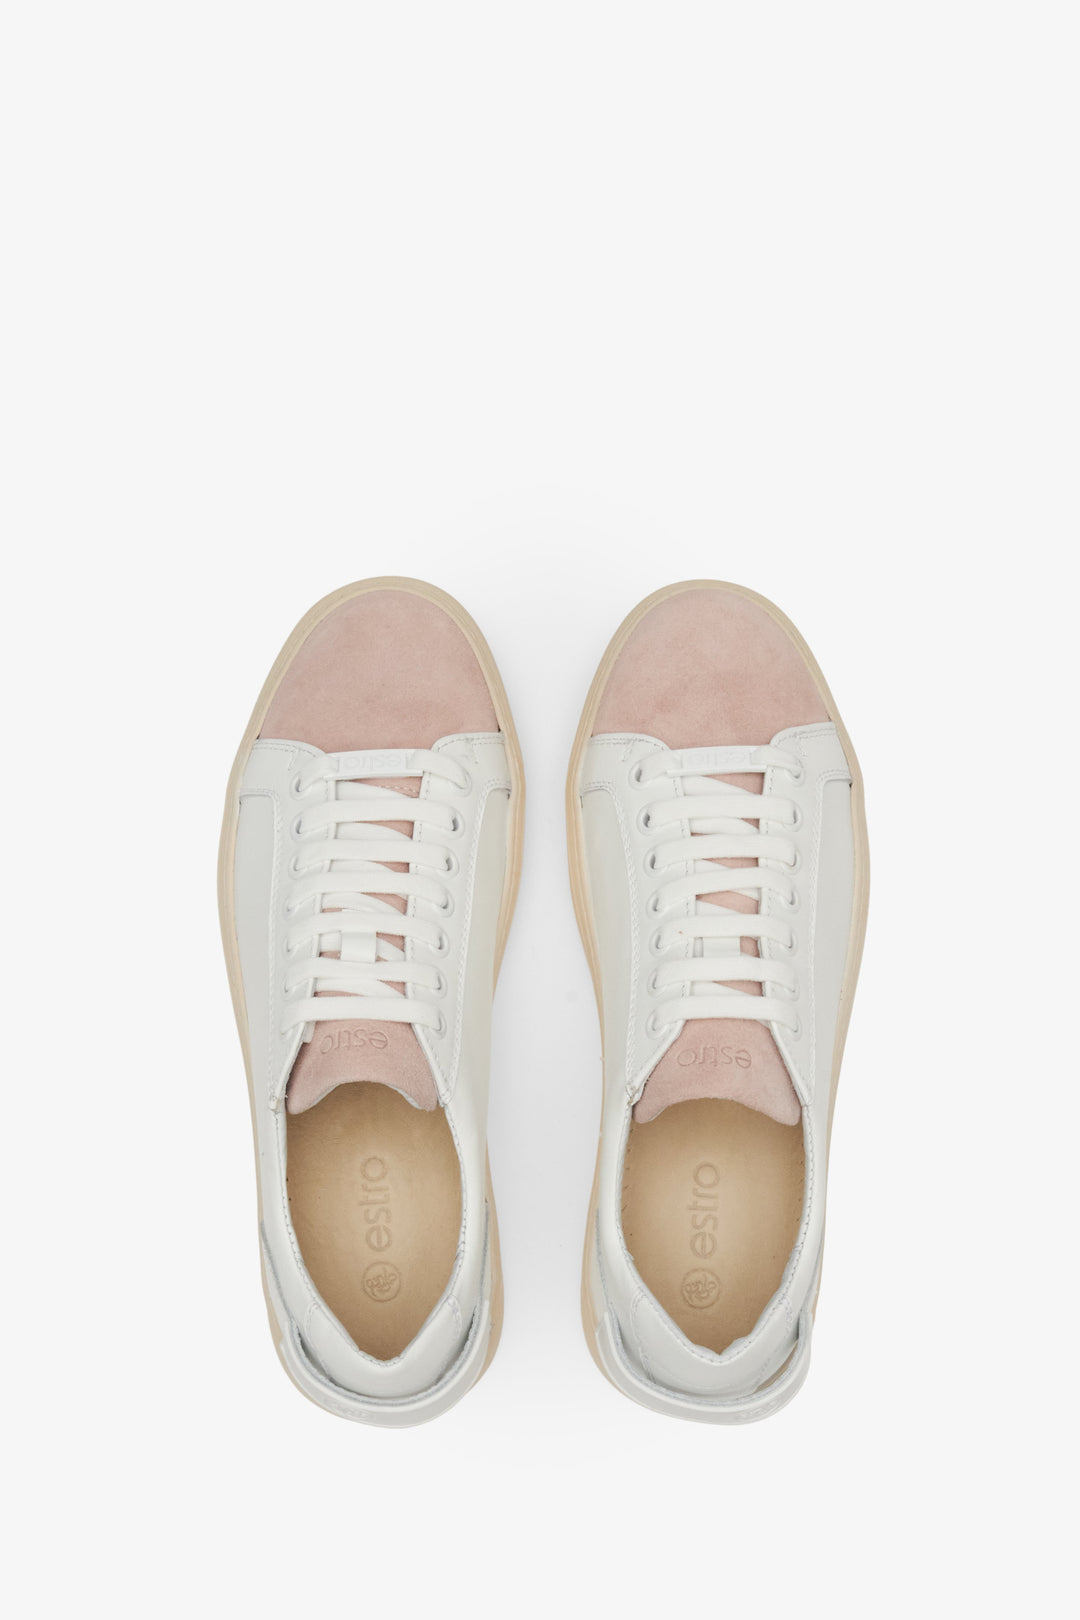 White and pink leather women's sneakers by Estro - top view presentation of the model.